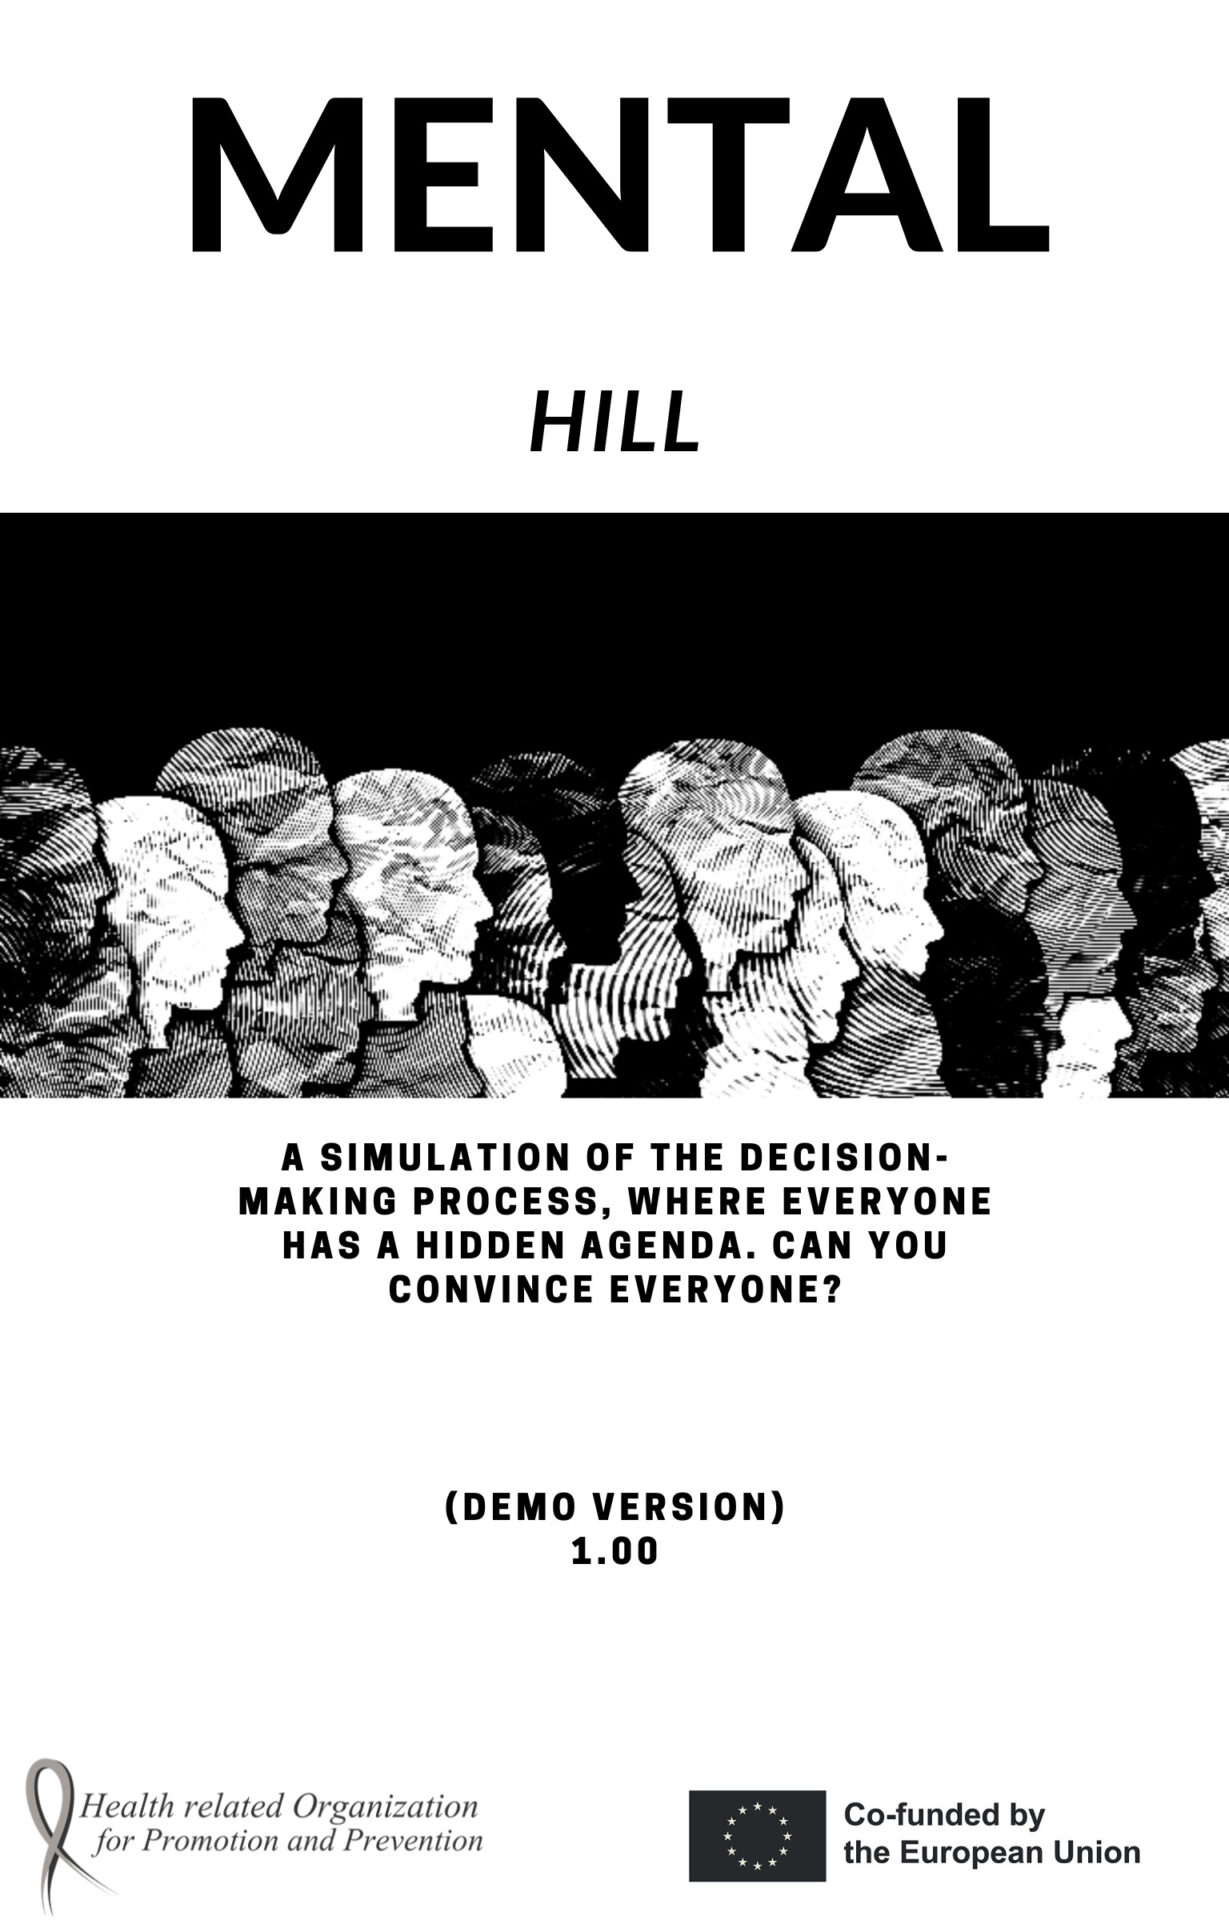 Mental Hill – decision making process game